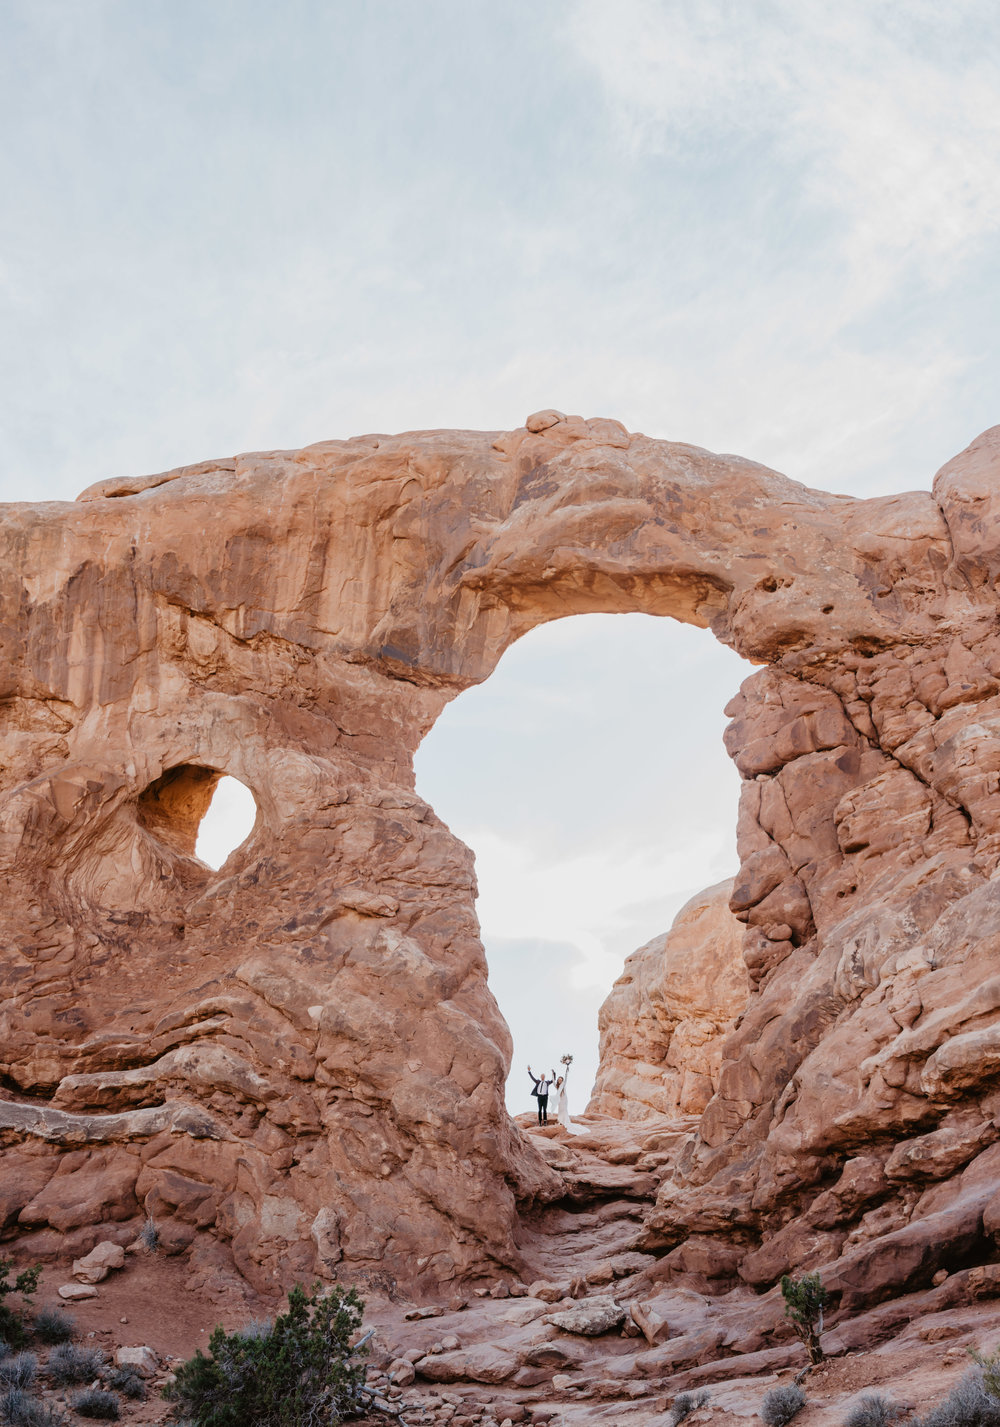 the arches in southern Utah with a boho bride and groom holding hands and shouting as they elope Jocilyn Bennett Photography | How to Plan an Elopement | Why Elope | Reasons to Elope | Destination Wedding Photographer | Utah Wedding Photographer | Adventure Photographer | Destination Elopement Photographer | Traveling Photographer | Arches National Park | Arches National Park Elopement | Southern Utah Elopement | Boho Bride | Bride with dreads |